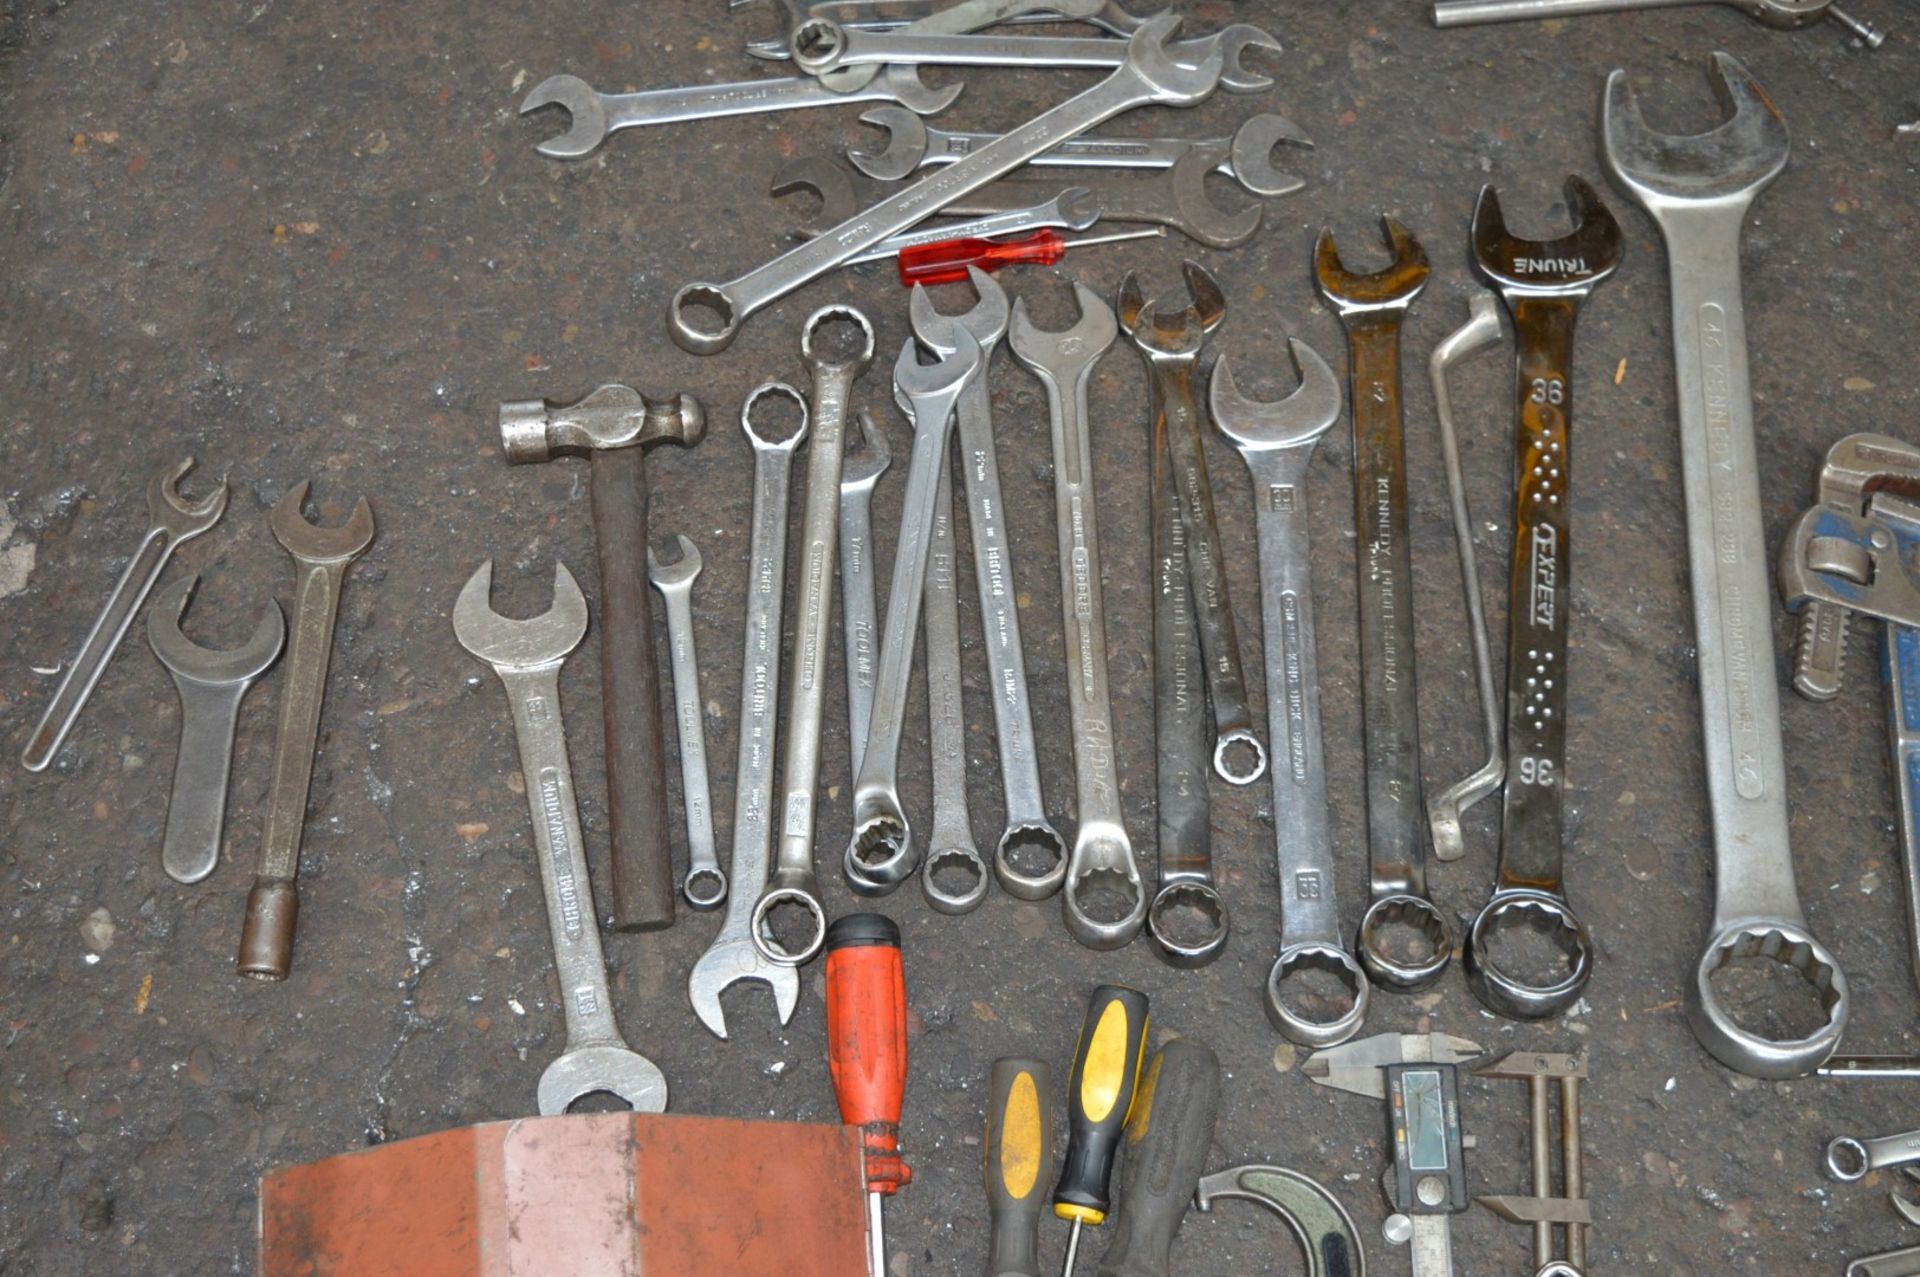 1 x Assorted Collection of Various Tools - Includes Approx 150 Pieces - Spanners, Allen Keys, - Image 6 of 8